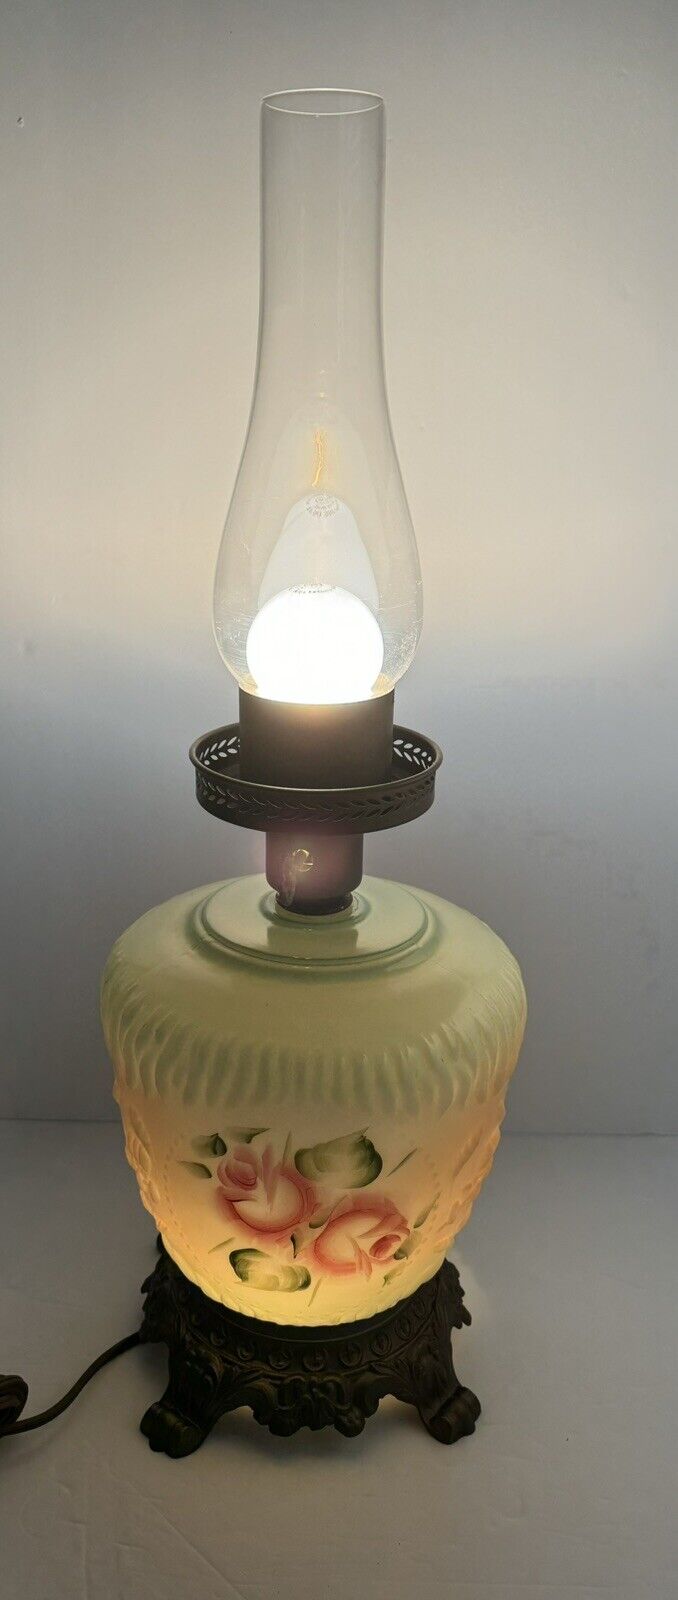 Vintage Painted Glass Electric 3-way Table Night Light Lamp - NO SHADE WORKS 